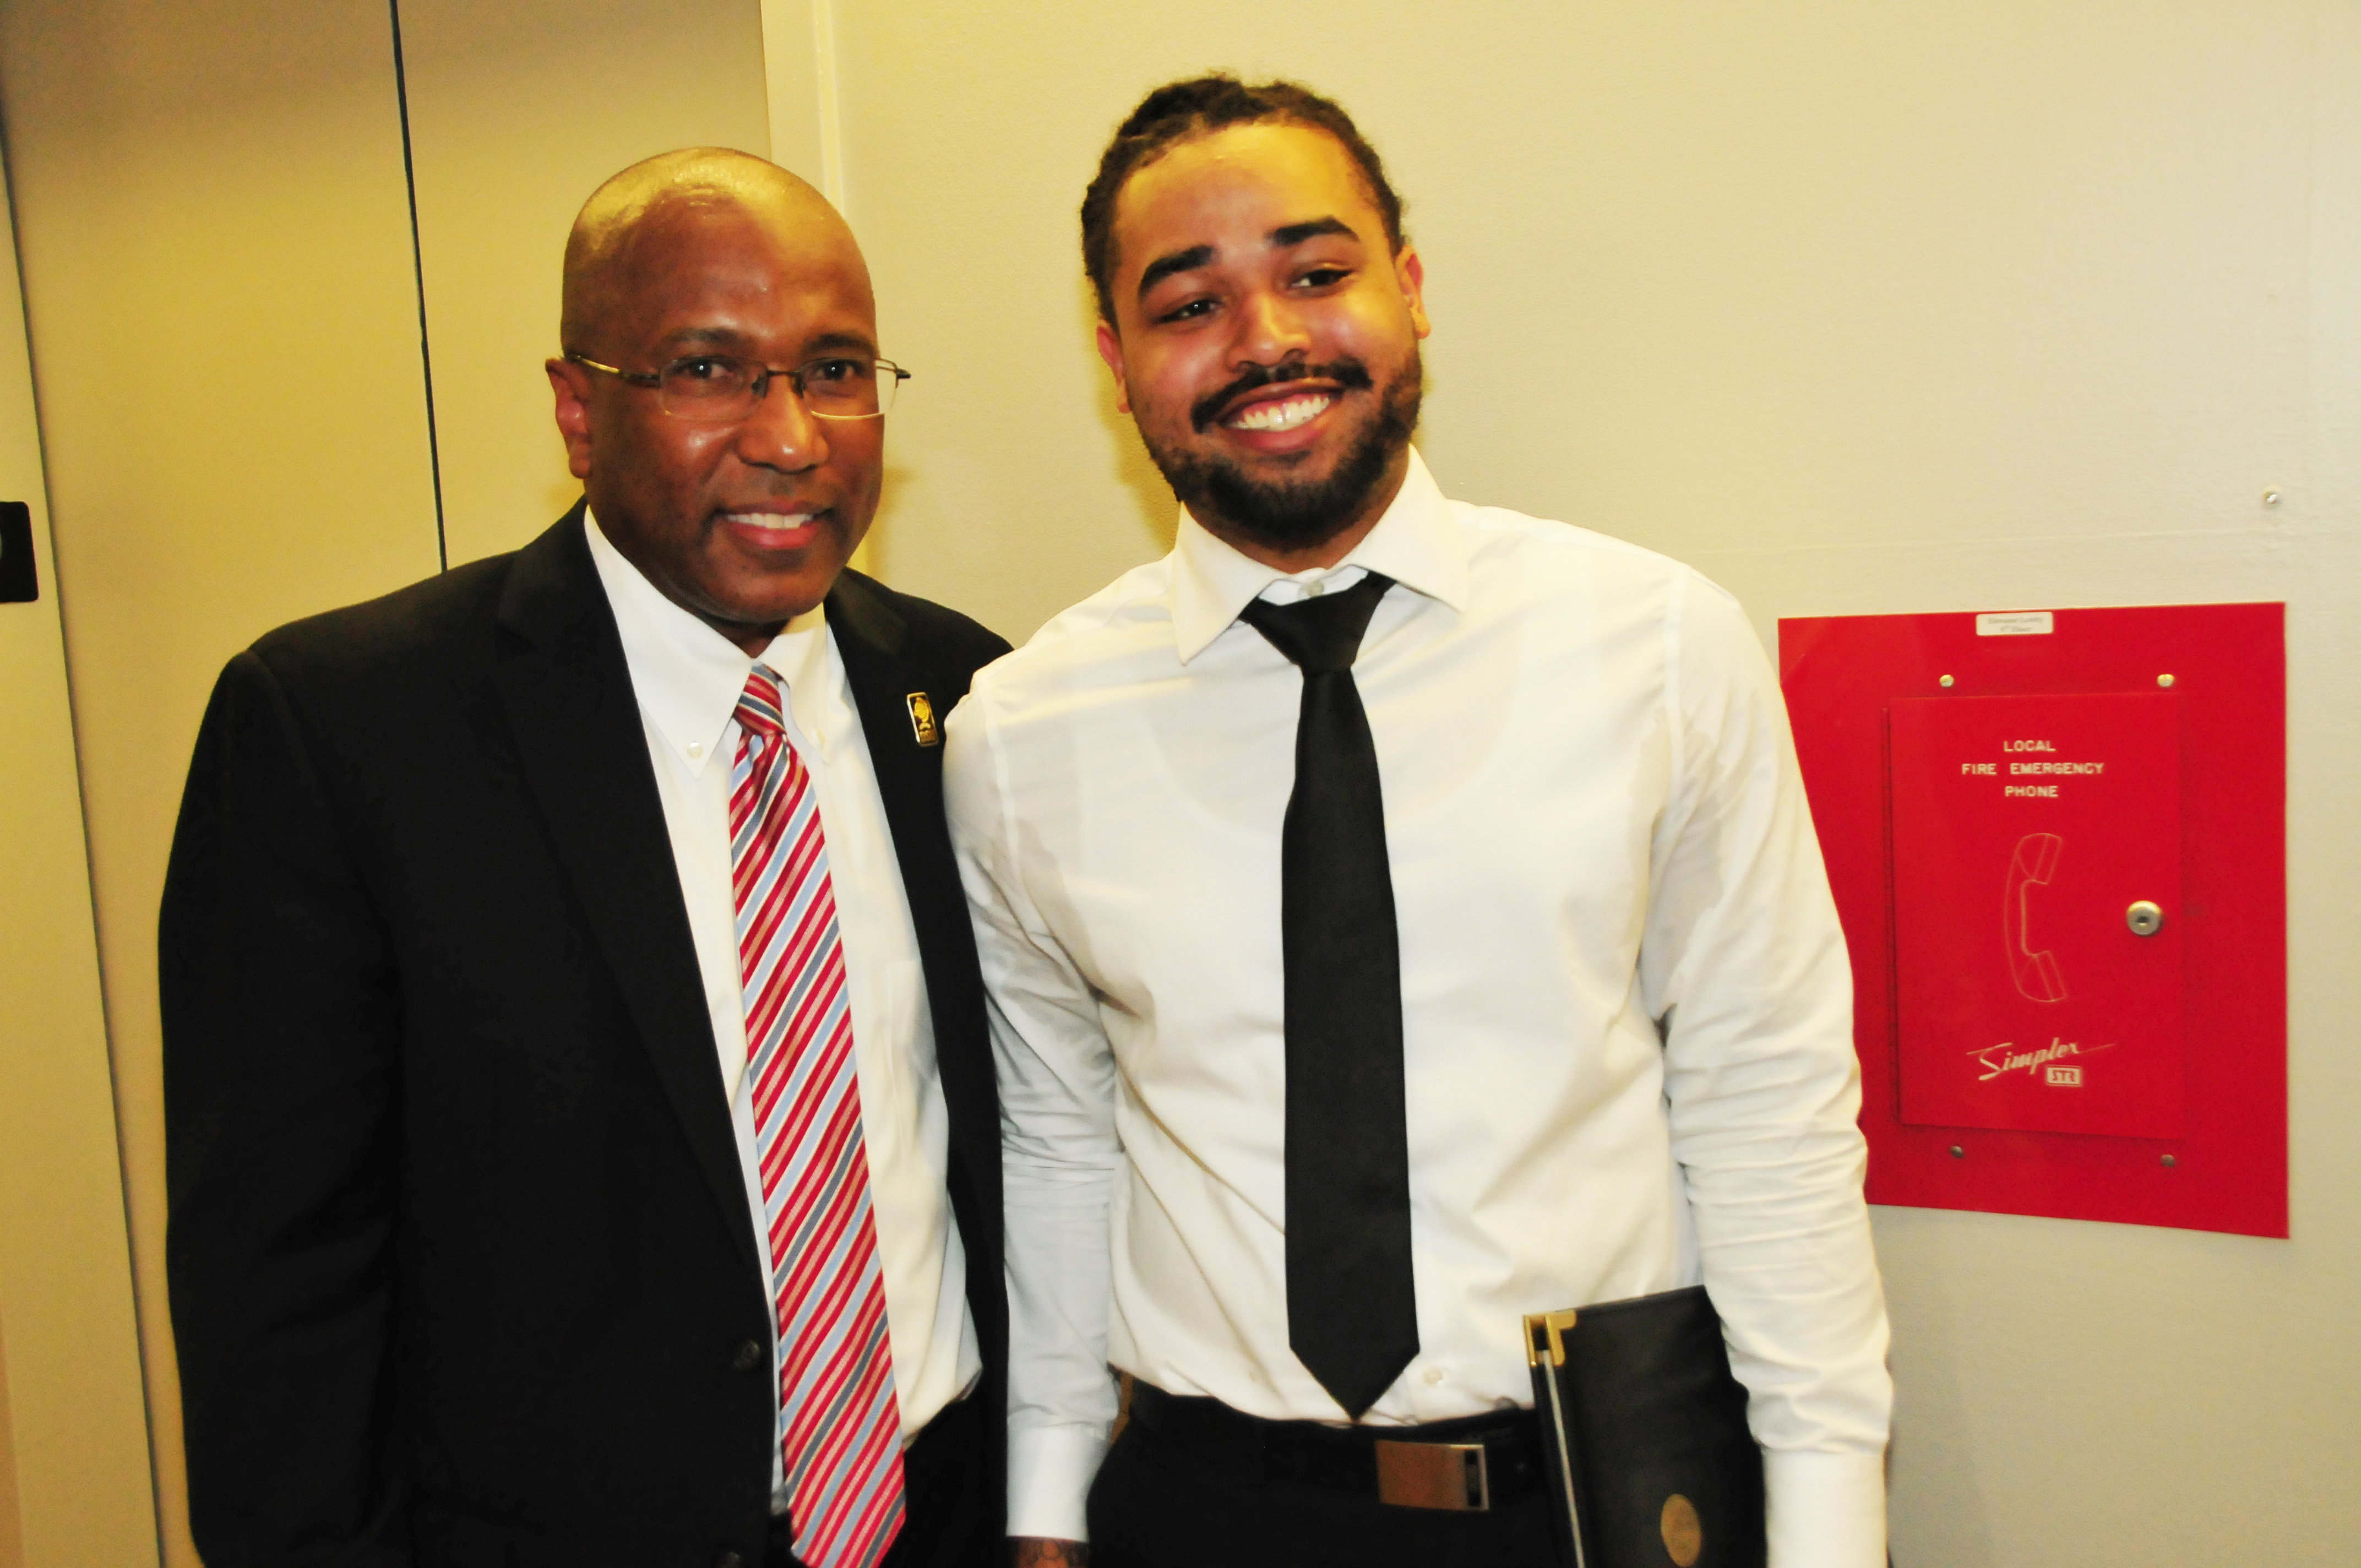 DSU President Harry L. Williams stands with DSU undergraduate Jeffrey Revel, who will be an intern working to help the city.